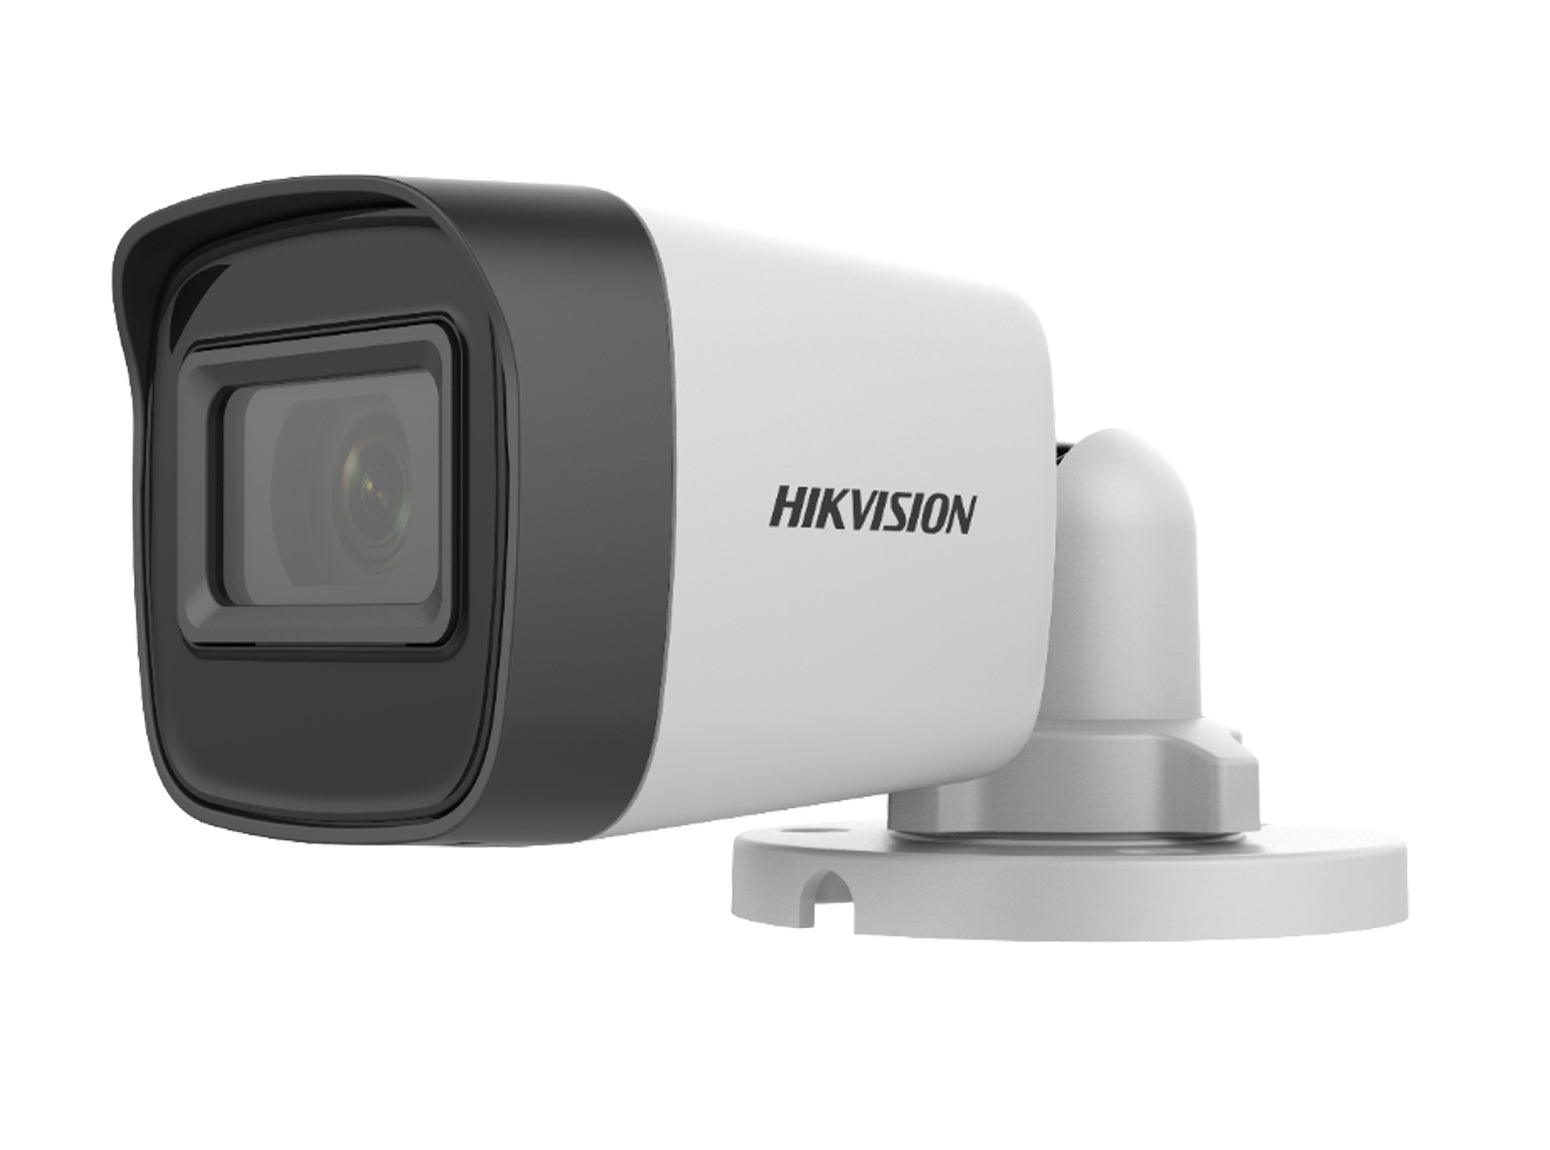 HIKVISION 2MP DS-2CE16D0T-EXIF OUTDOOR EXIR FIXED MINI BULLET CAMERA (2.8mm/3.6mm)